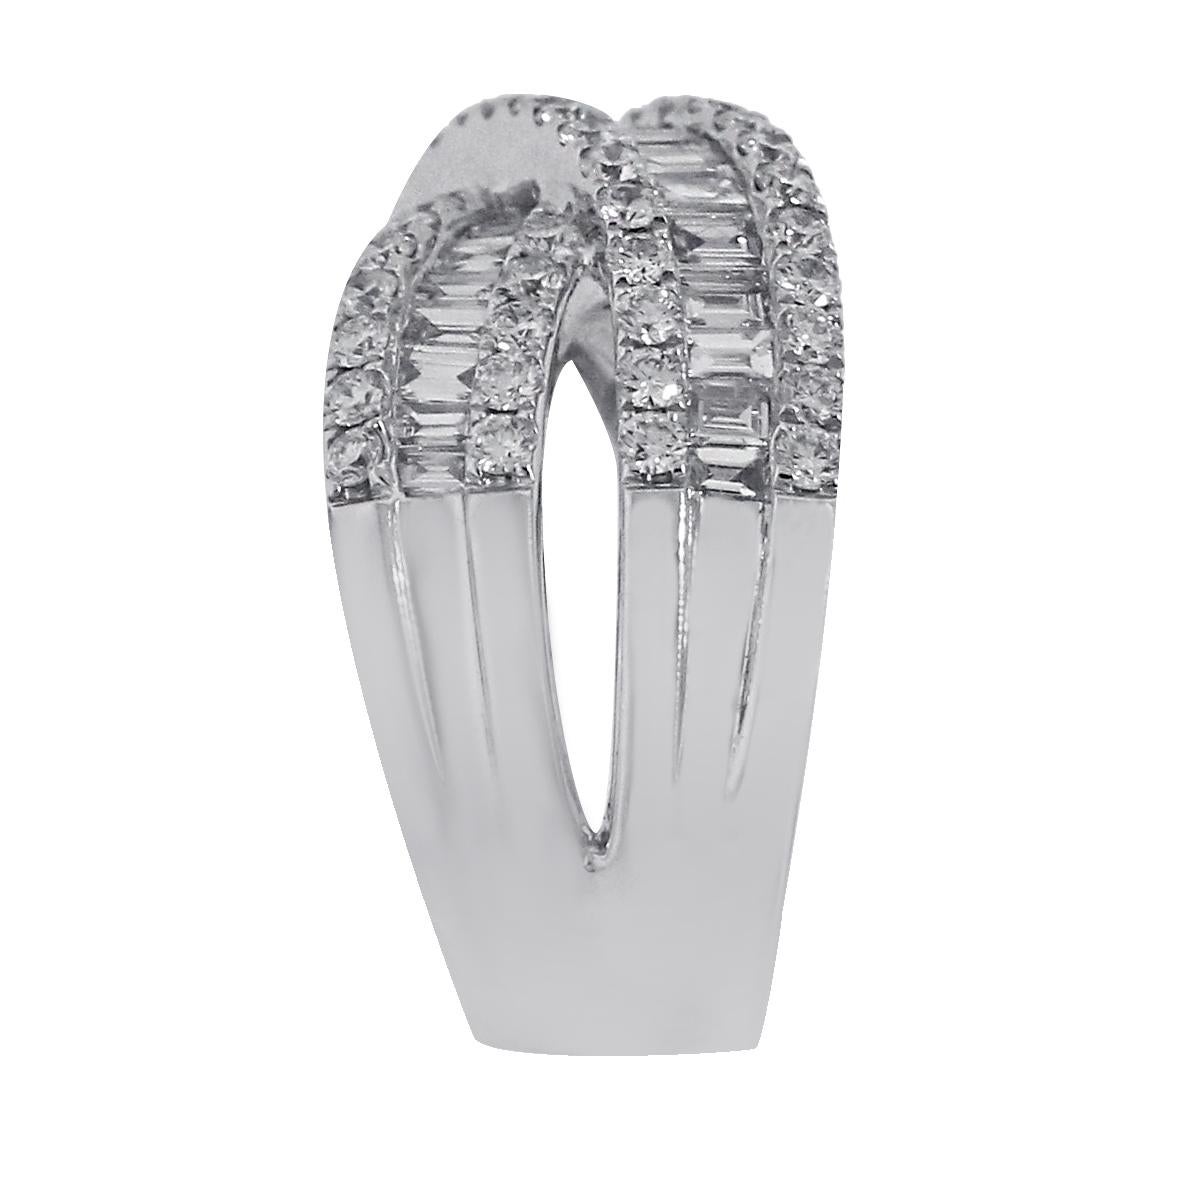 Material: 18k White Gold
Diamond Details: Approximately 2.17ctw round and baguette diamonds. Diamonds are H/I in color and SI1 in clarity.
Ring Size: 6.5 (can be sized)
Total Weight: 12.2g (7.8dwt)
Measurements: 0.80